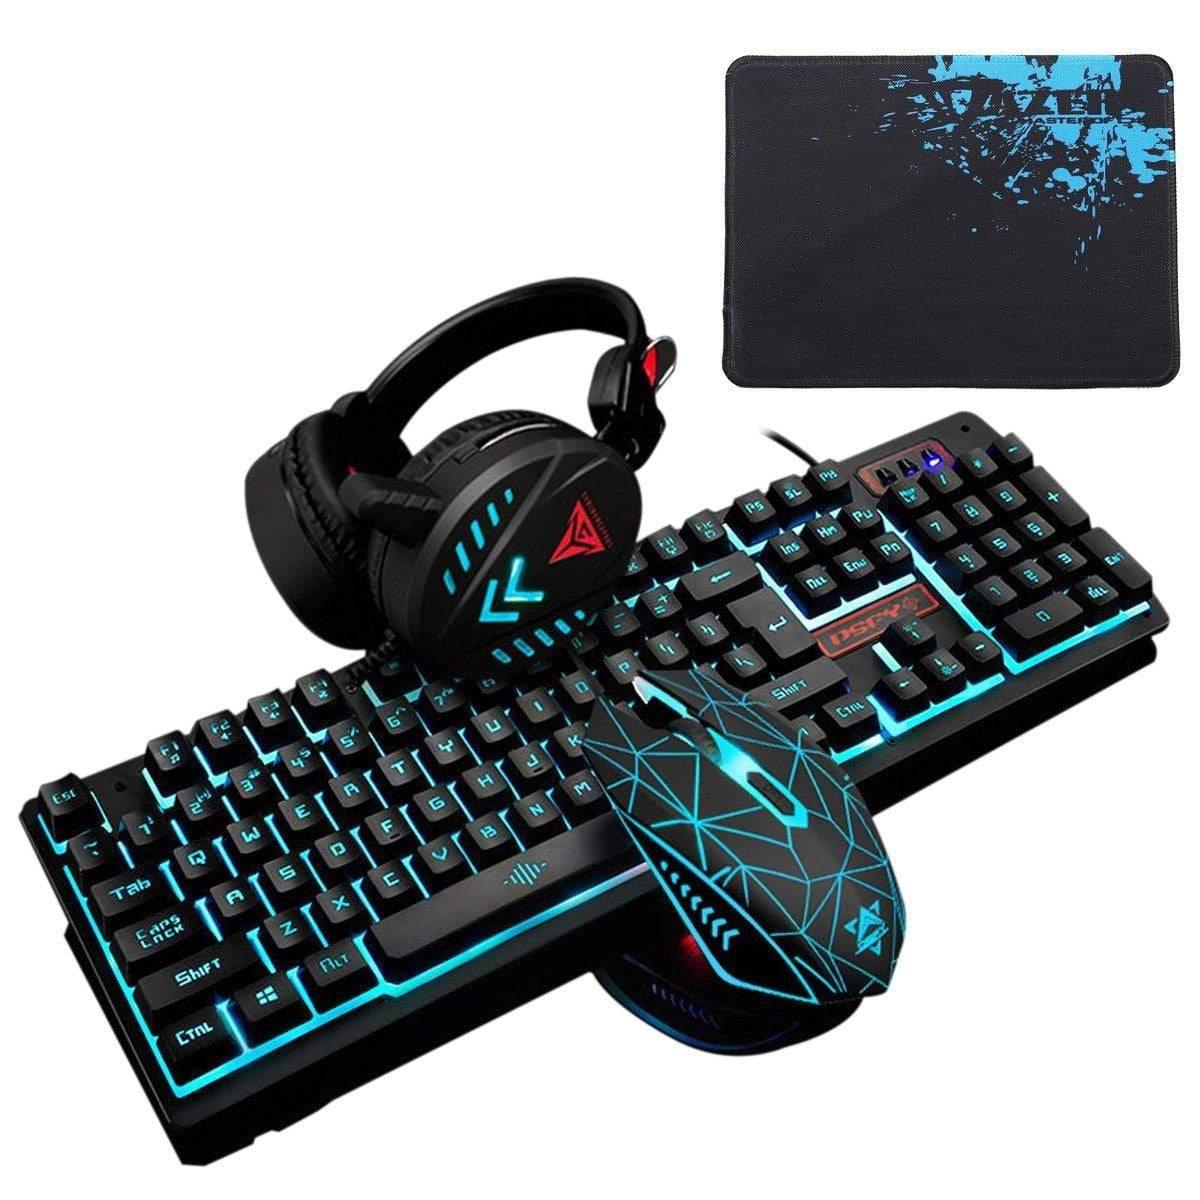 ezy2find Gaming Mouse Sets with Mouse Pad Black & Light Blue 104Key Waterproof design USB Wired Multimedia RGB Backlit Mechanical Gaming Keyboard and LED Gaming Headphone and 3200DPI LED Gaming Mouse Sets with Mouse Pad